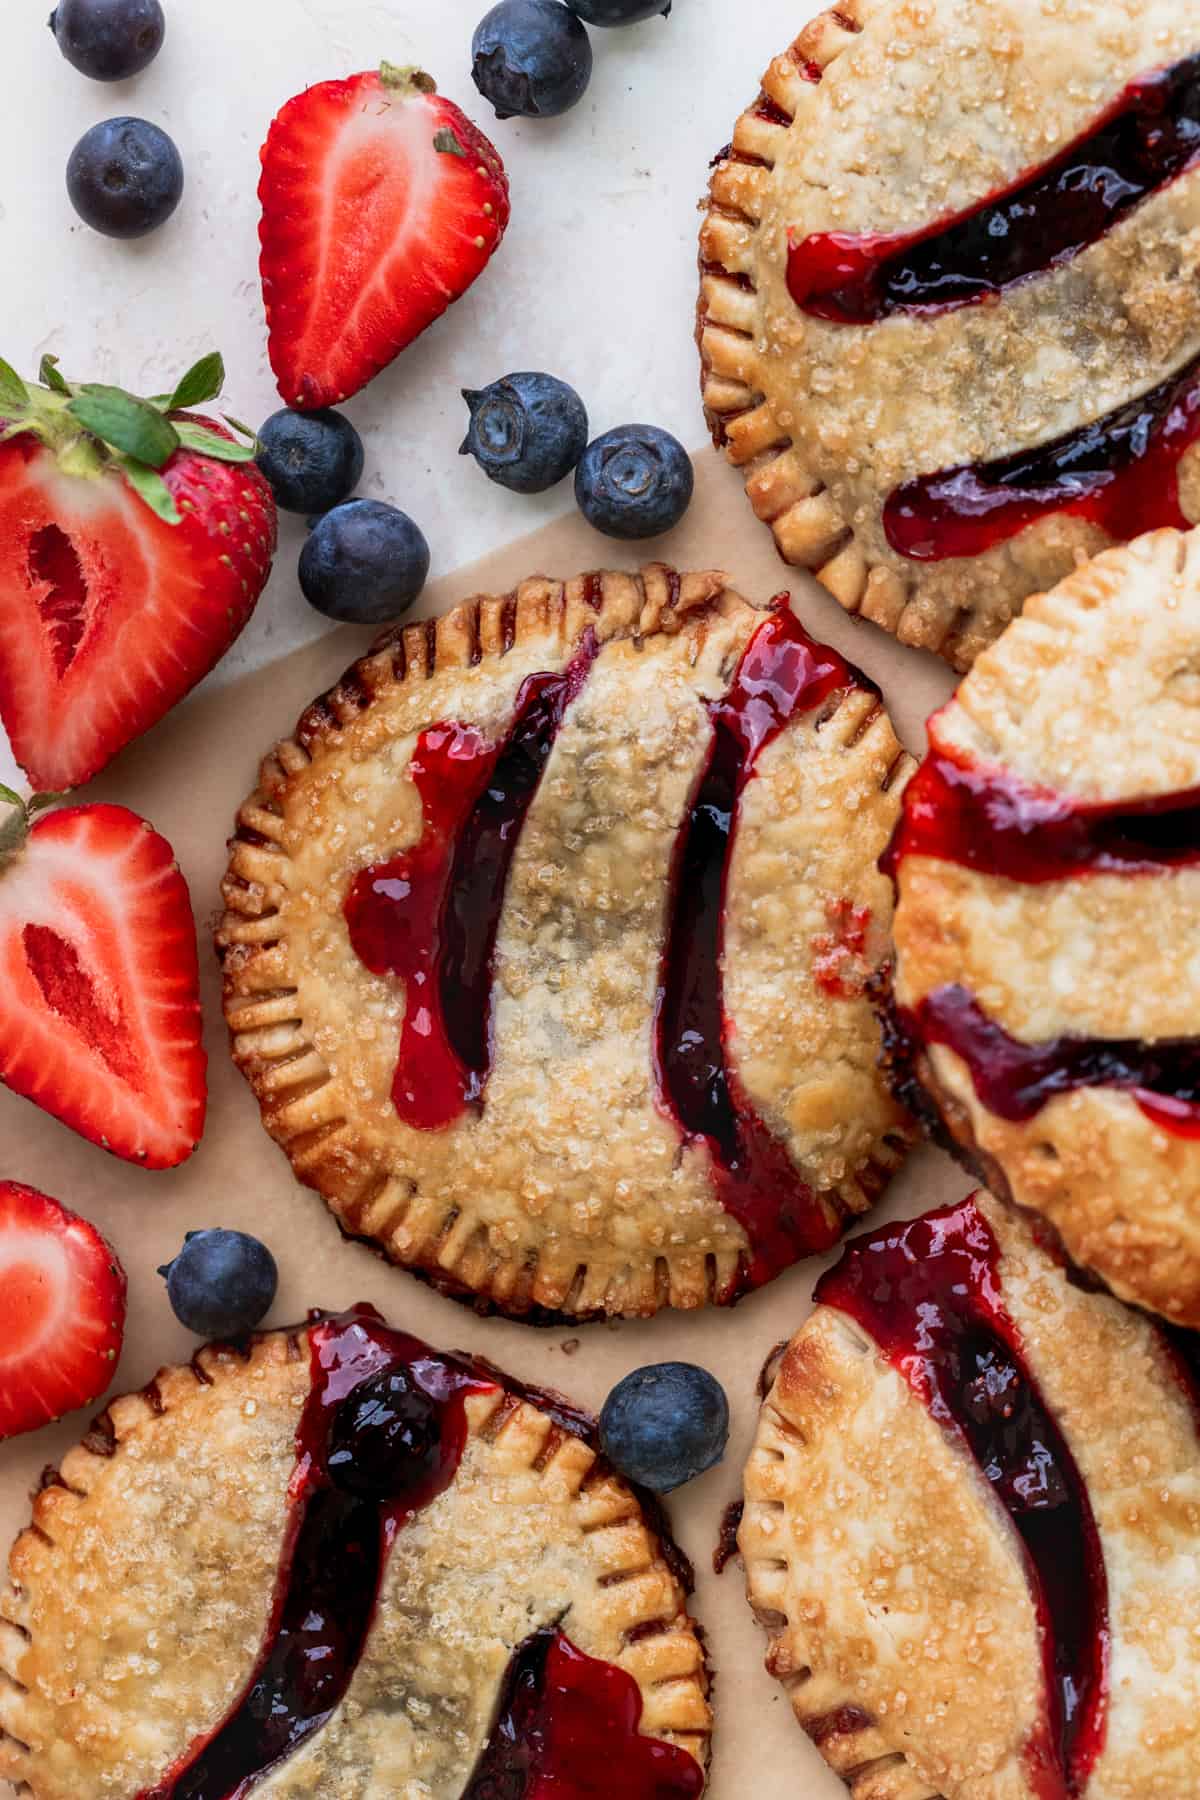 Pies on parchment paper with fresh berries.